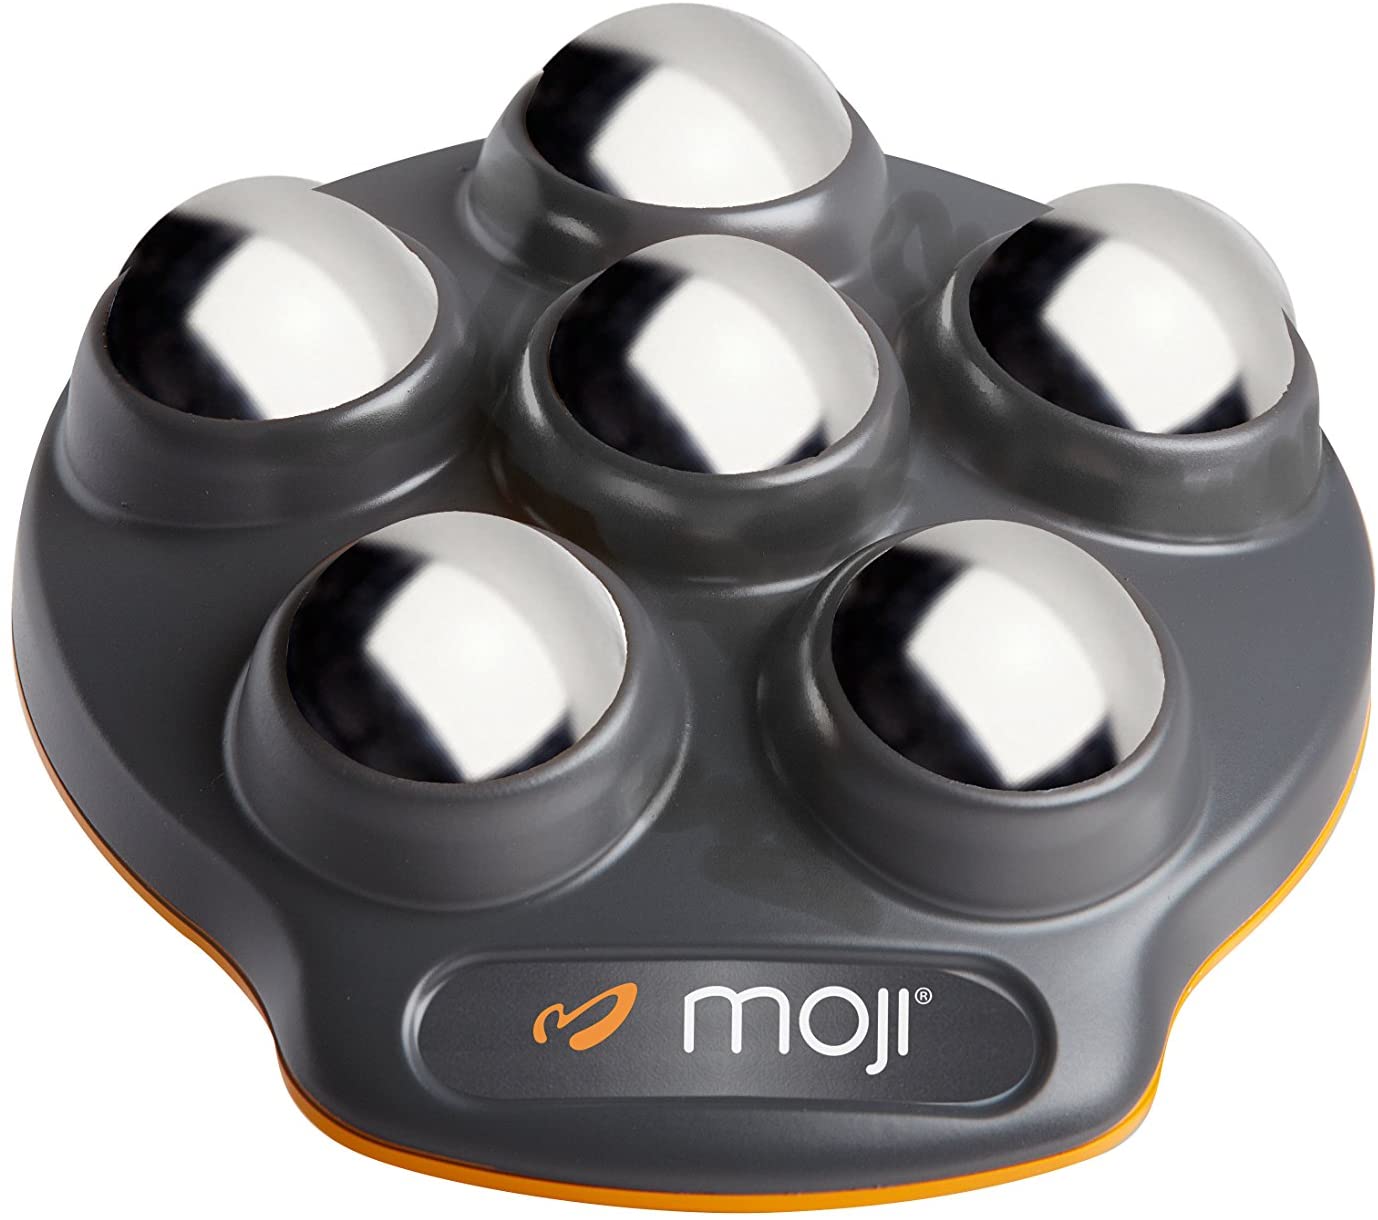 Be Well Rested With The Best Foot Massager For Your Home 7